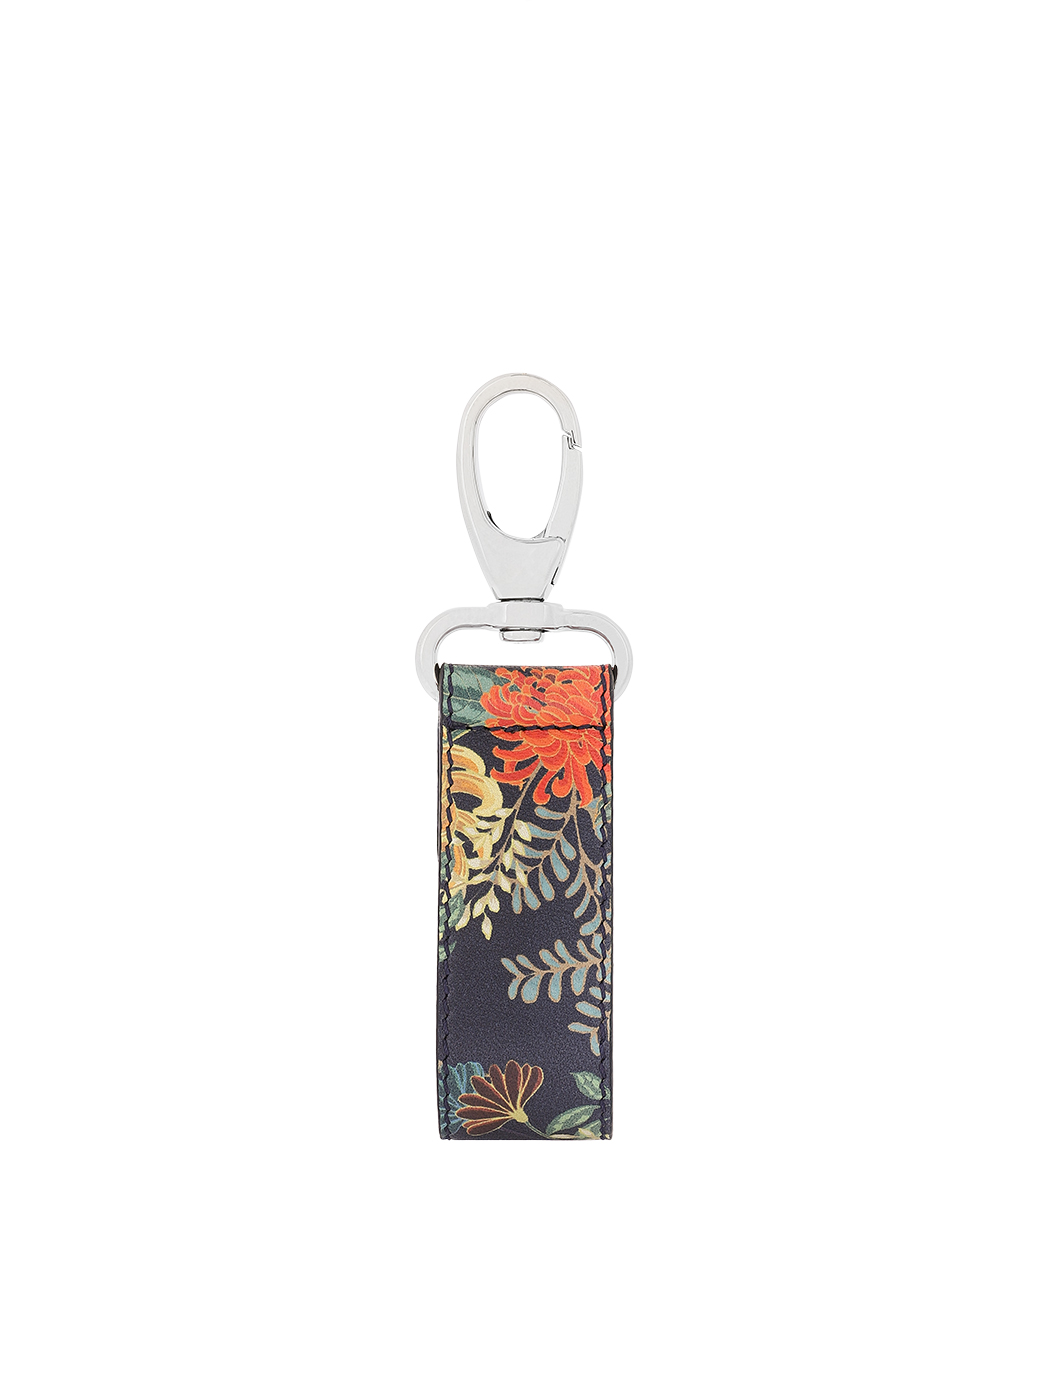 Key Lanyard in Floral Leather - Navy blue